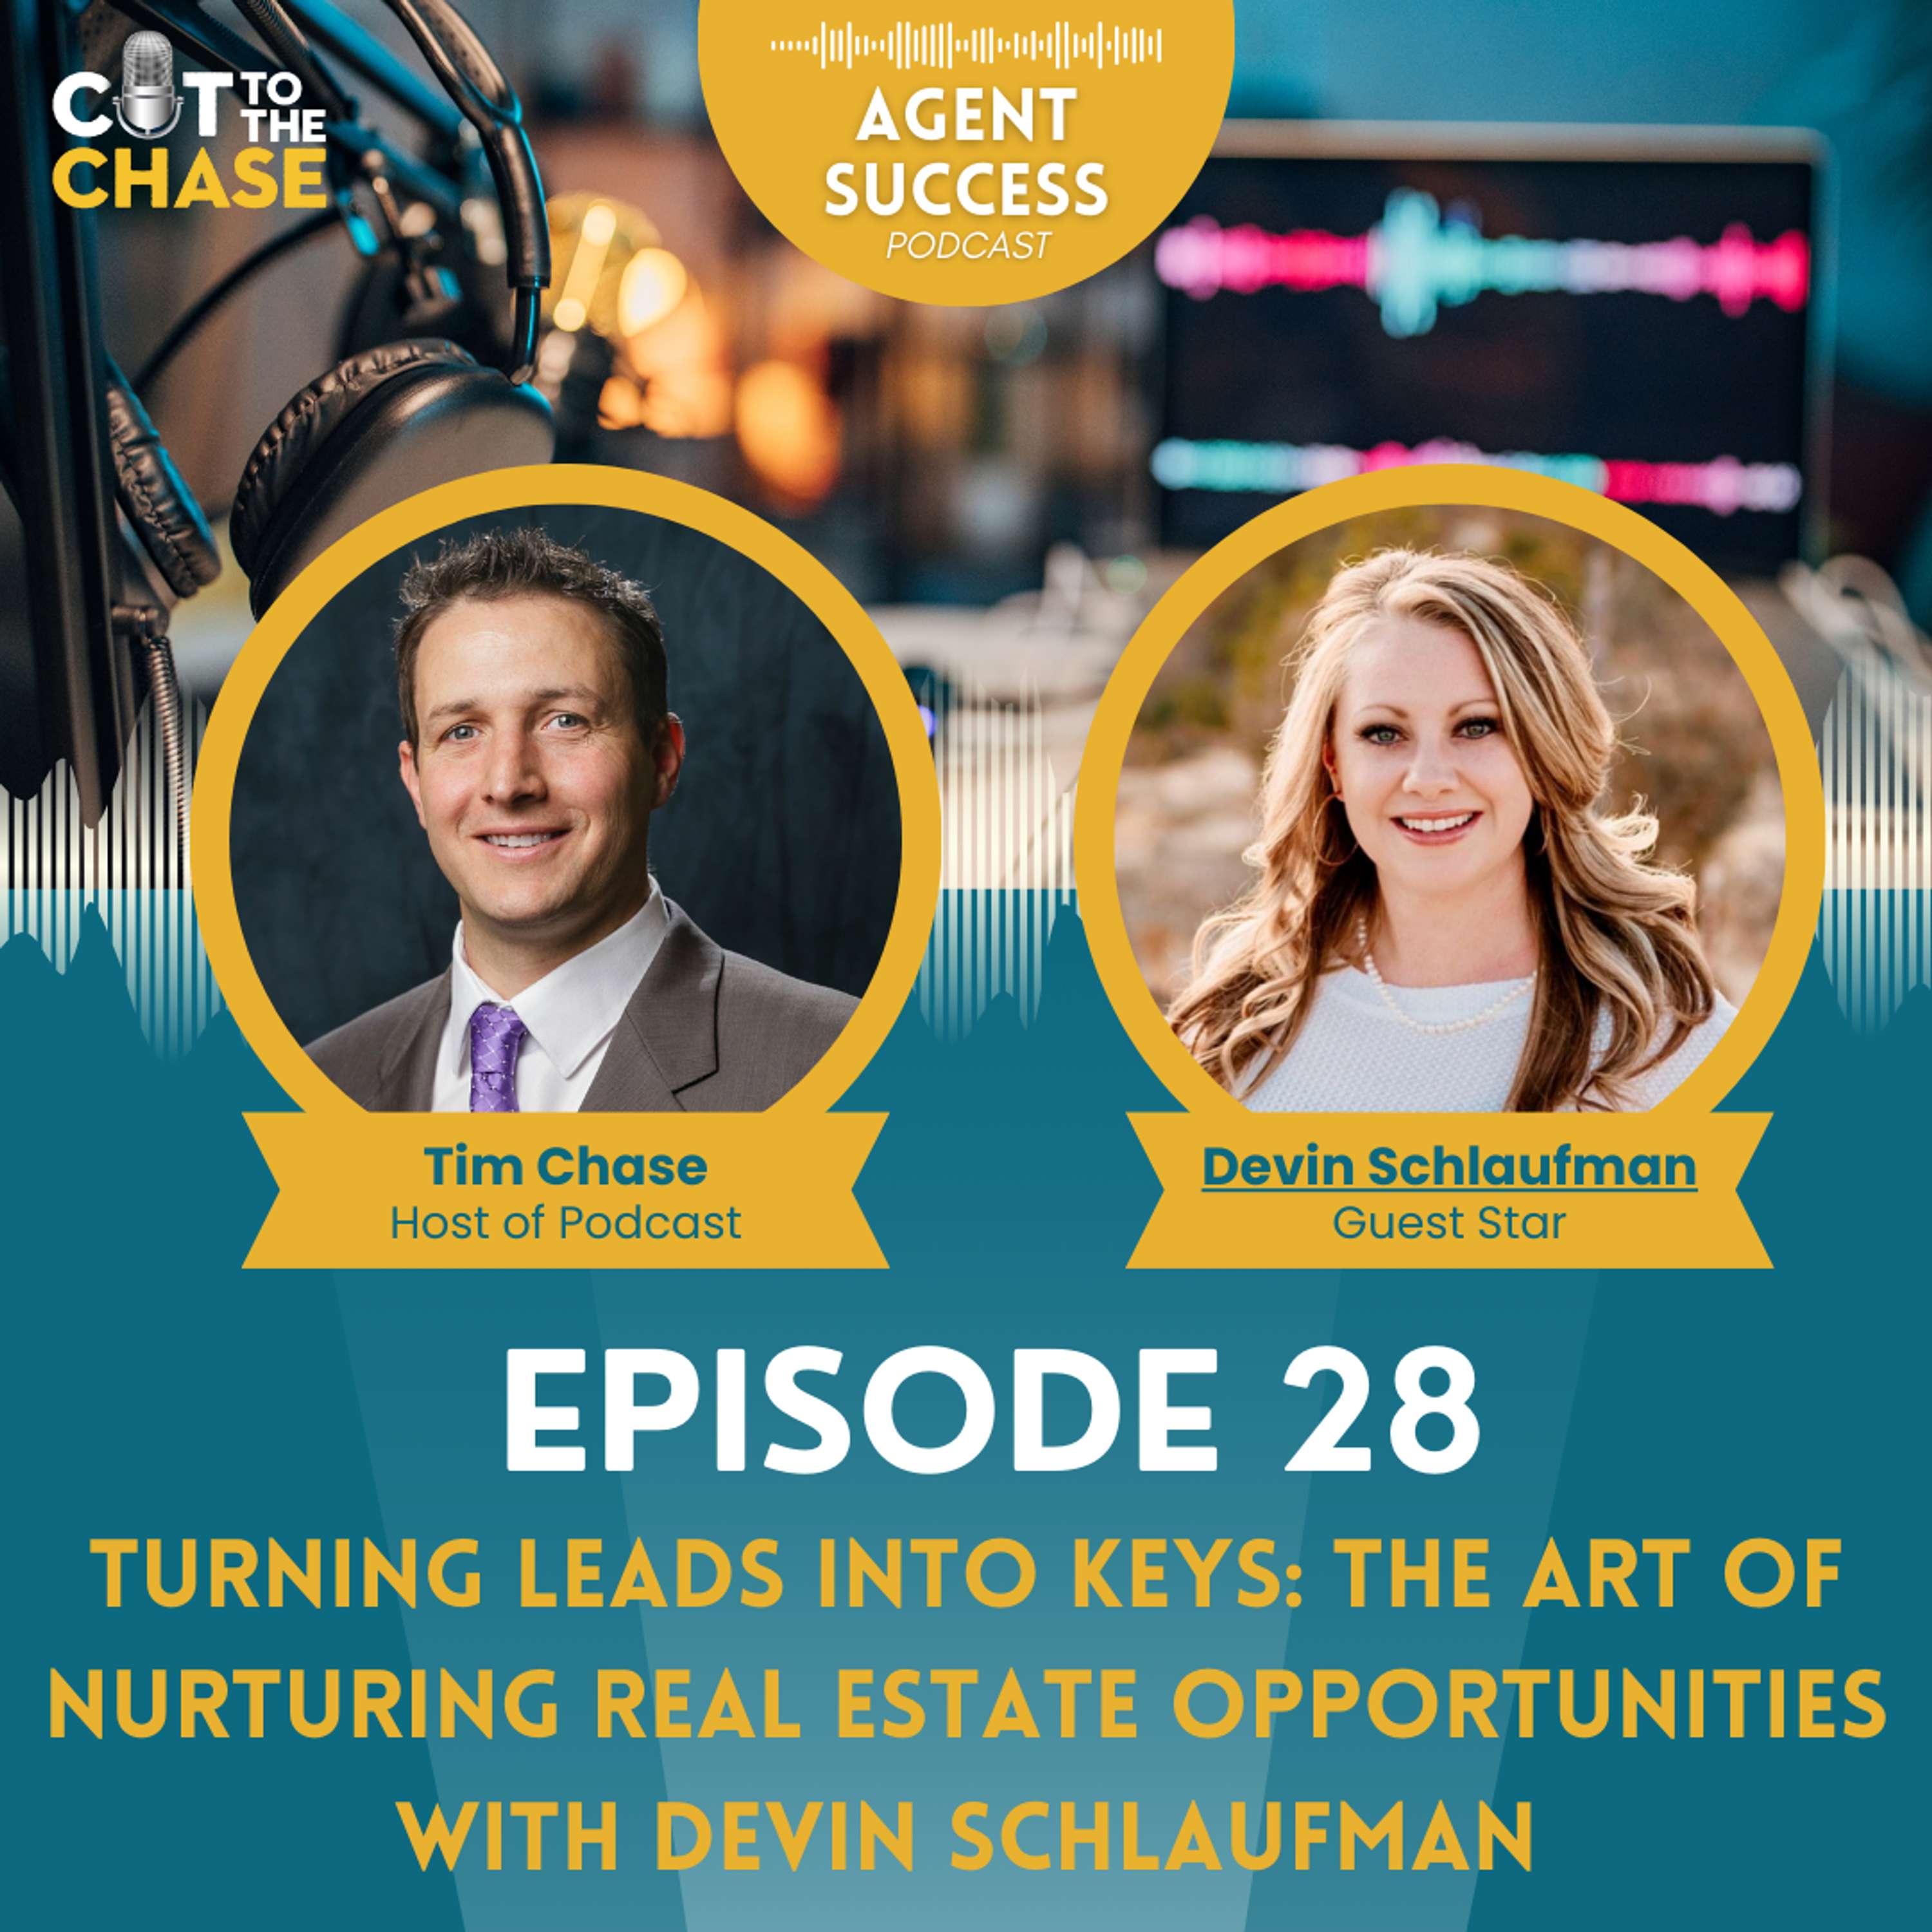 Episode 28: Turning Leads into Keys: The Art of Nurturing Real Estate Opportunities with Devin Schlaufman